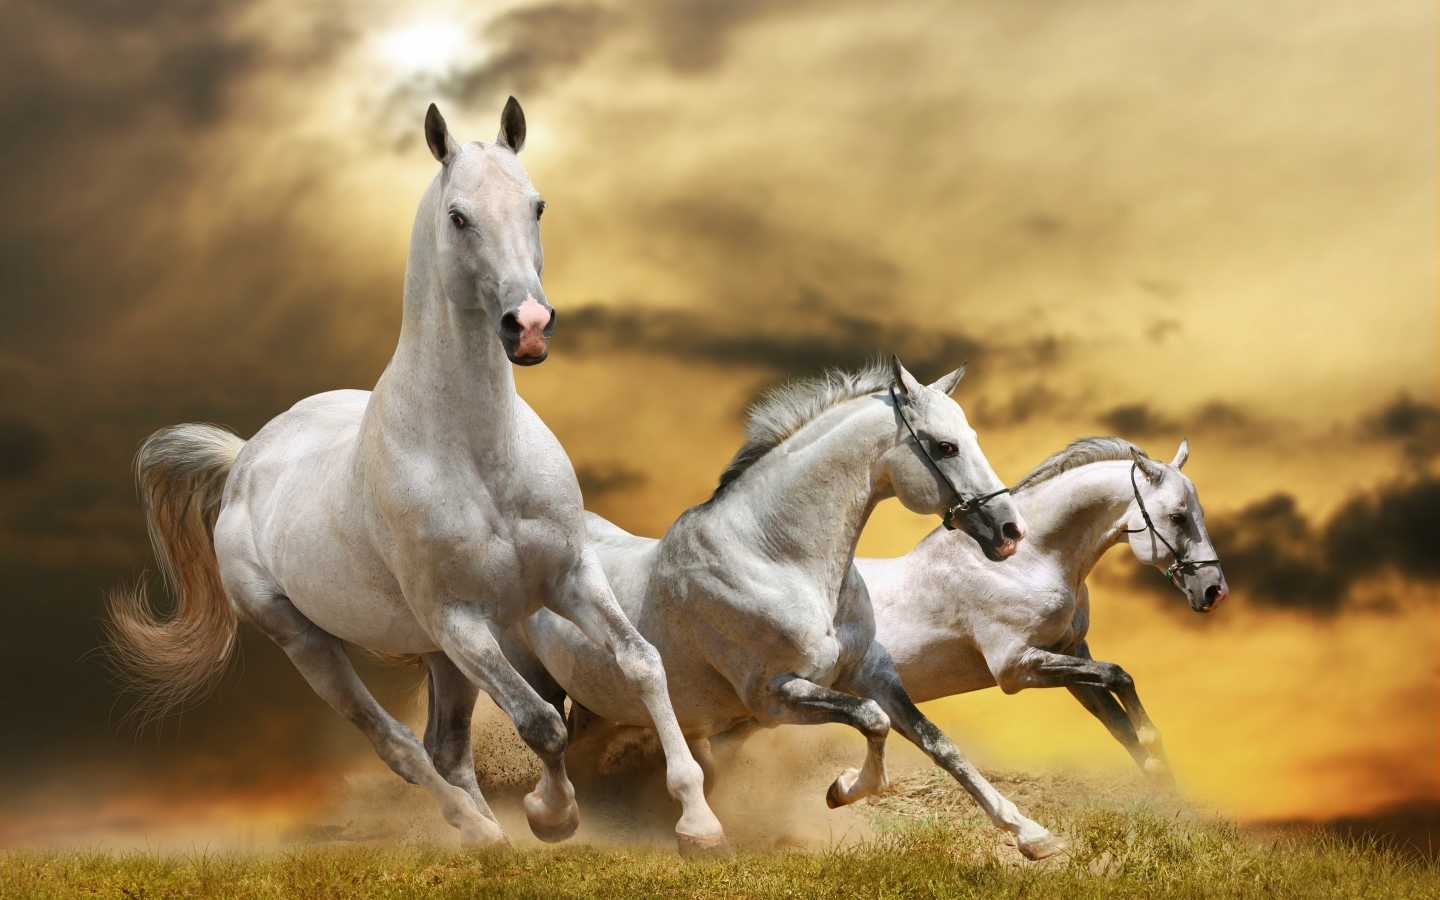 Wilde White Horses for 1440 x 900 widescreen resolution